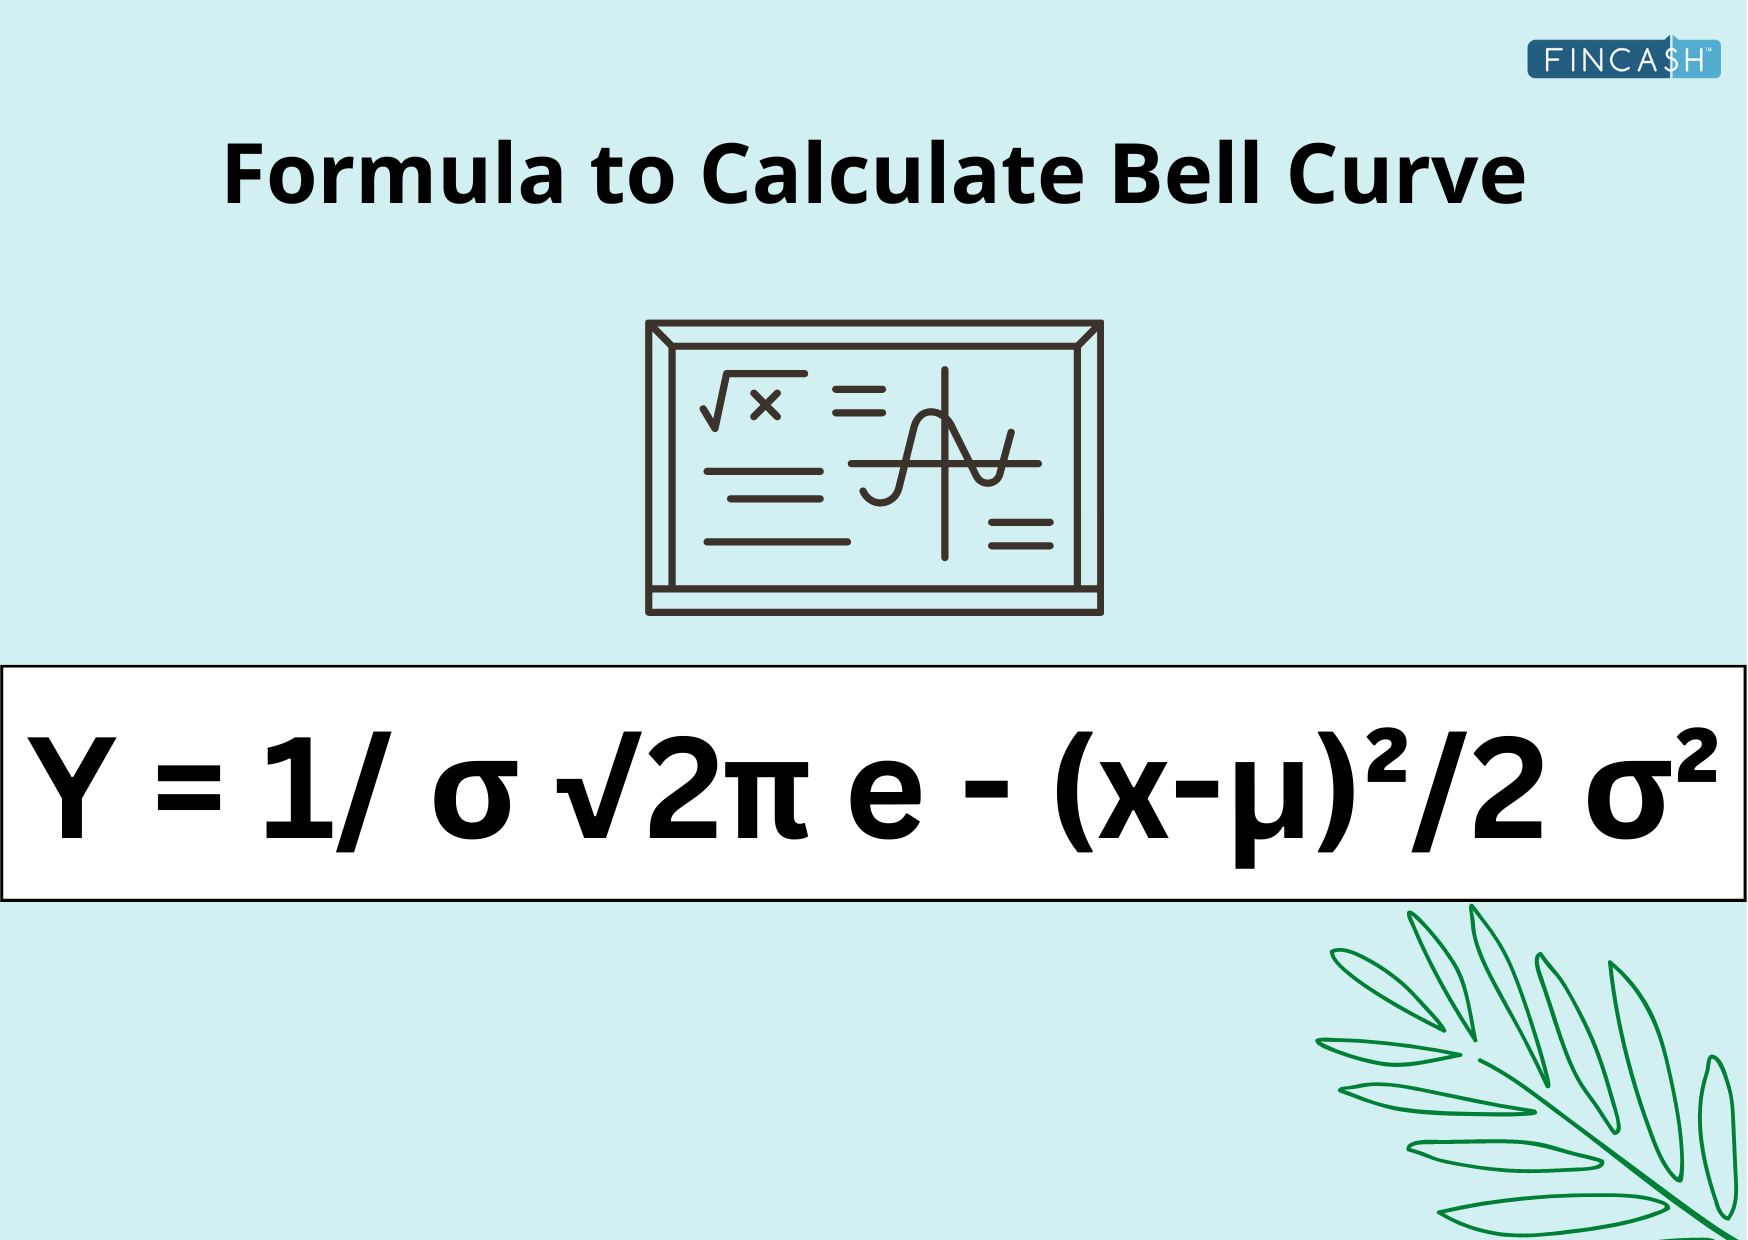 What is a Bell Curve in Finance?